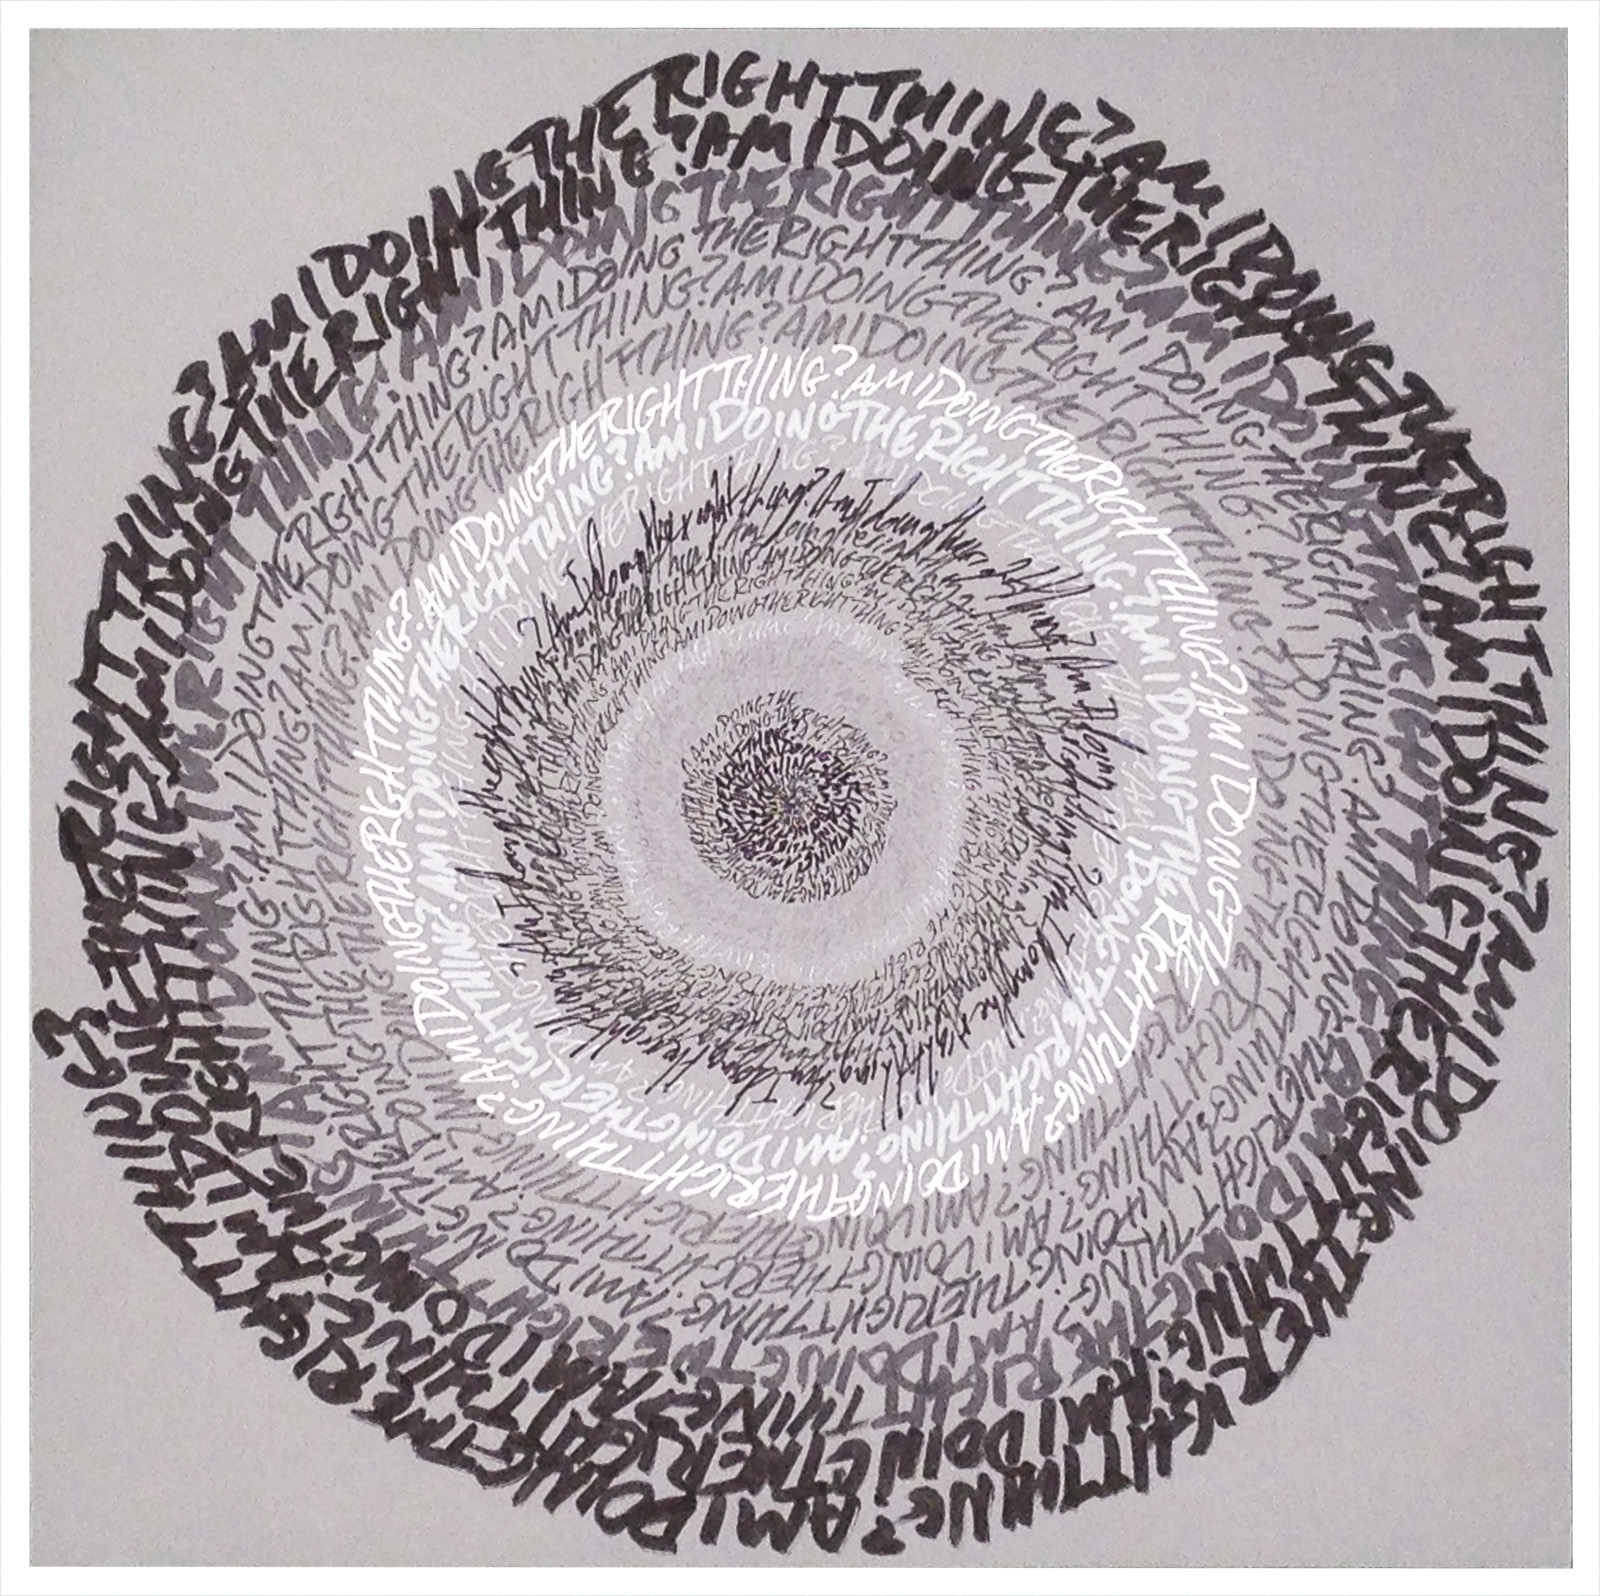 "Energy Spiral—Am I Doing The Right Thing?", 2014, pen & marker on paper, 10 in. x 10 in.